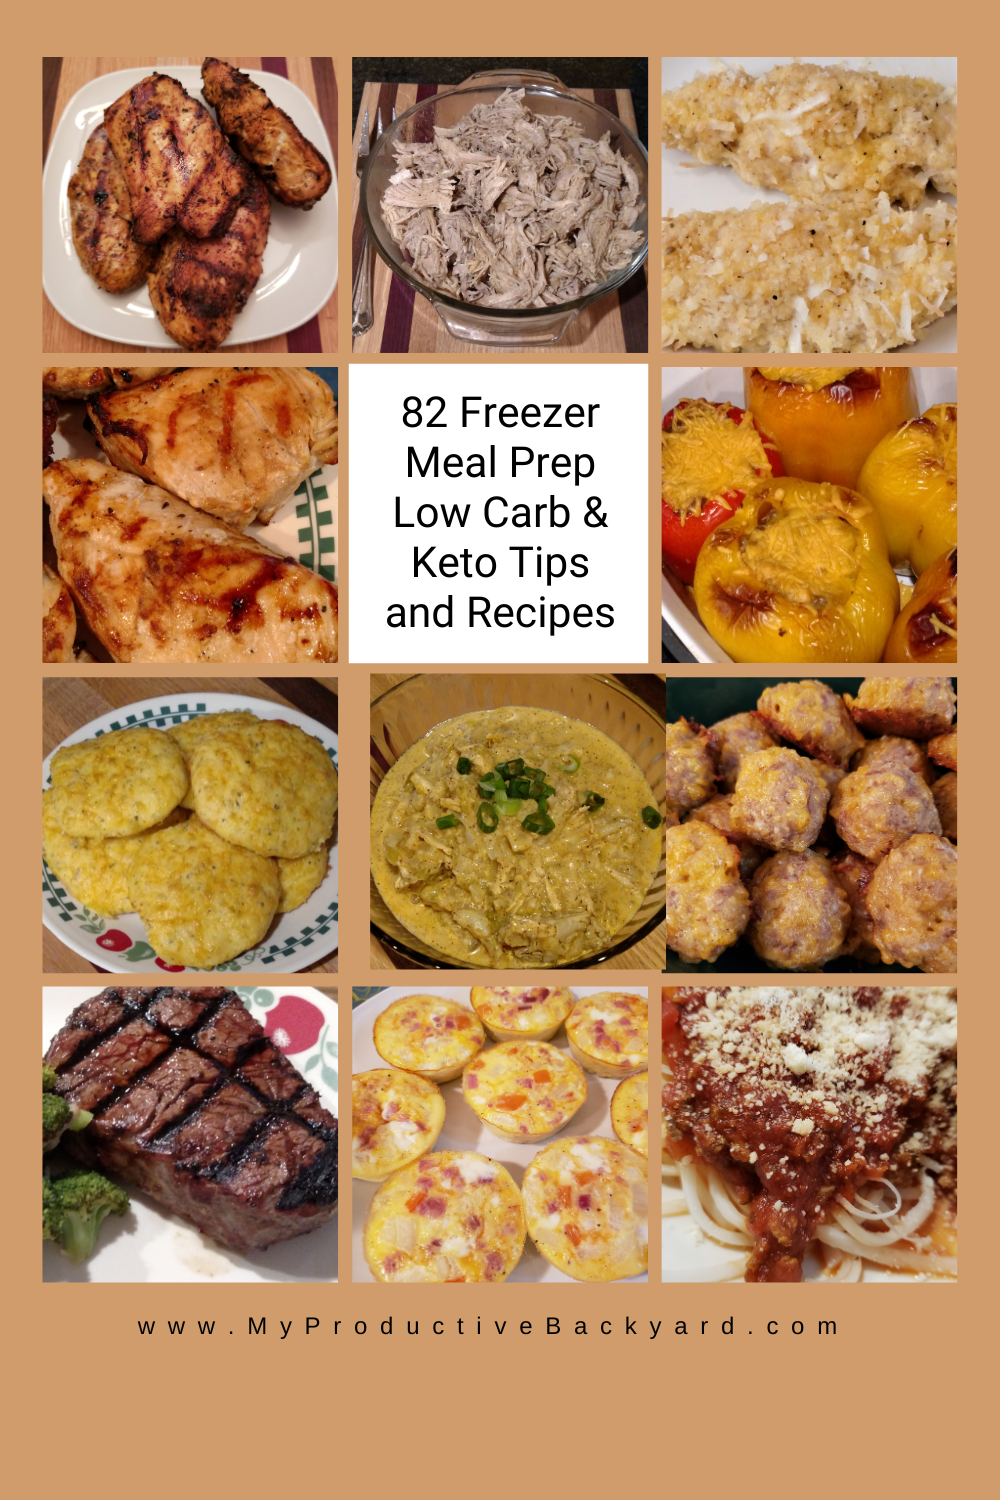 https://myproductivebackyard.com/wp-content/uploads/2018/02/82-Freezer-Meal-Prep-Low-Carb-Keto-Tips-and-Recipes-Pinterest-Pin-1.png